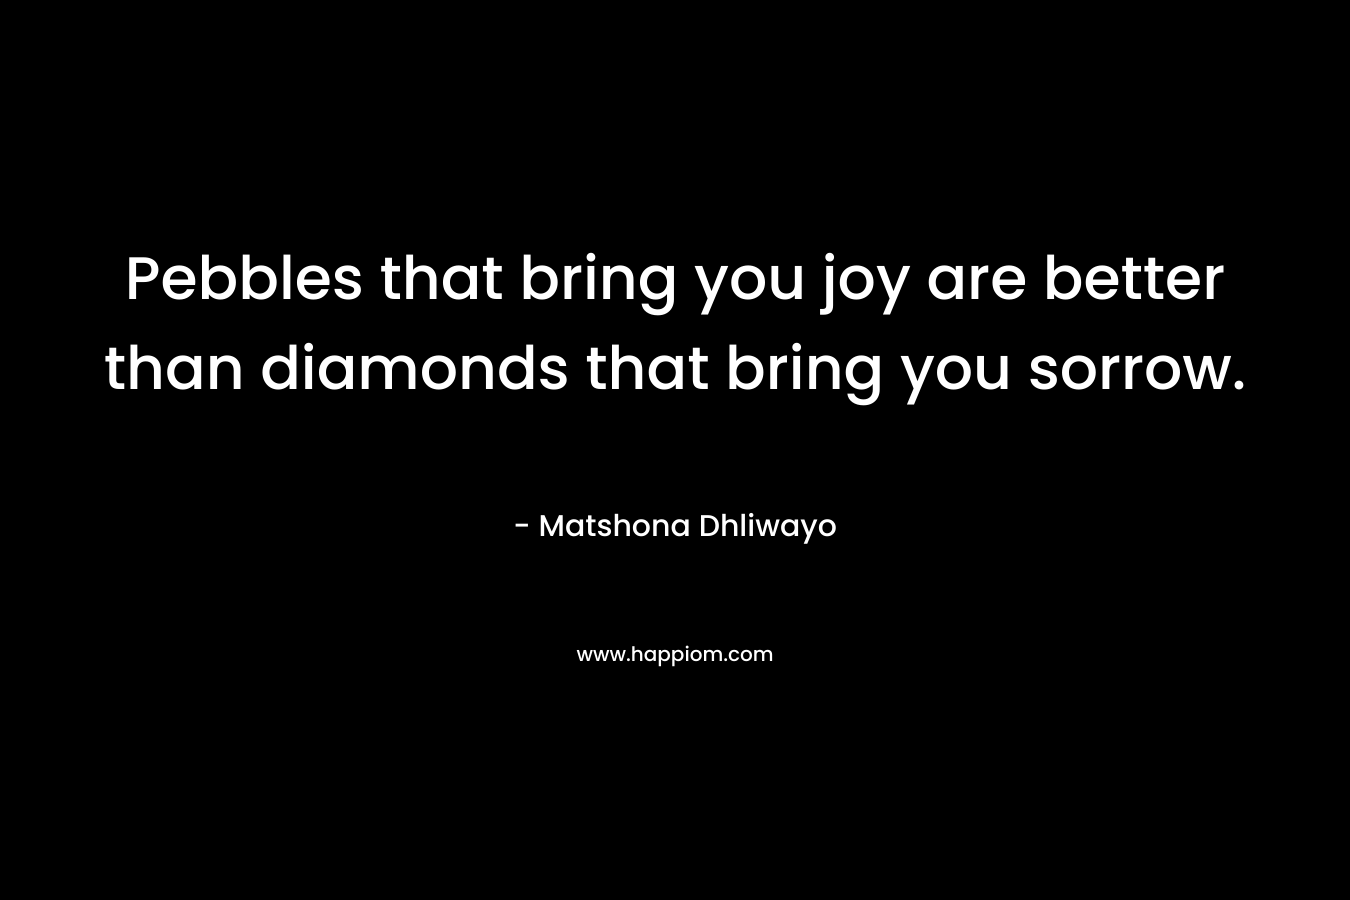 Pebbles that bring you joy are better than diamonds that bring you sorrow.